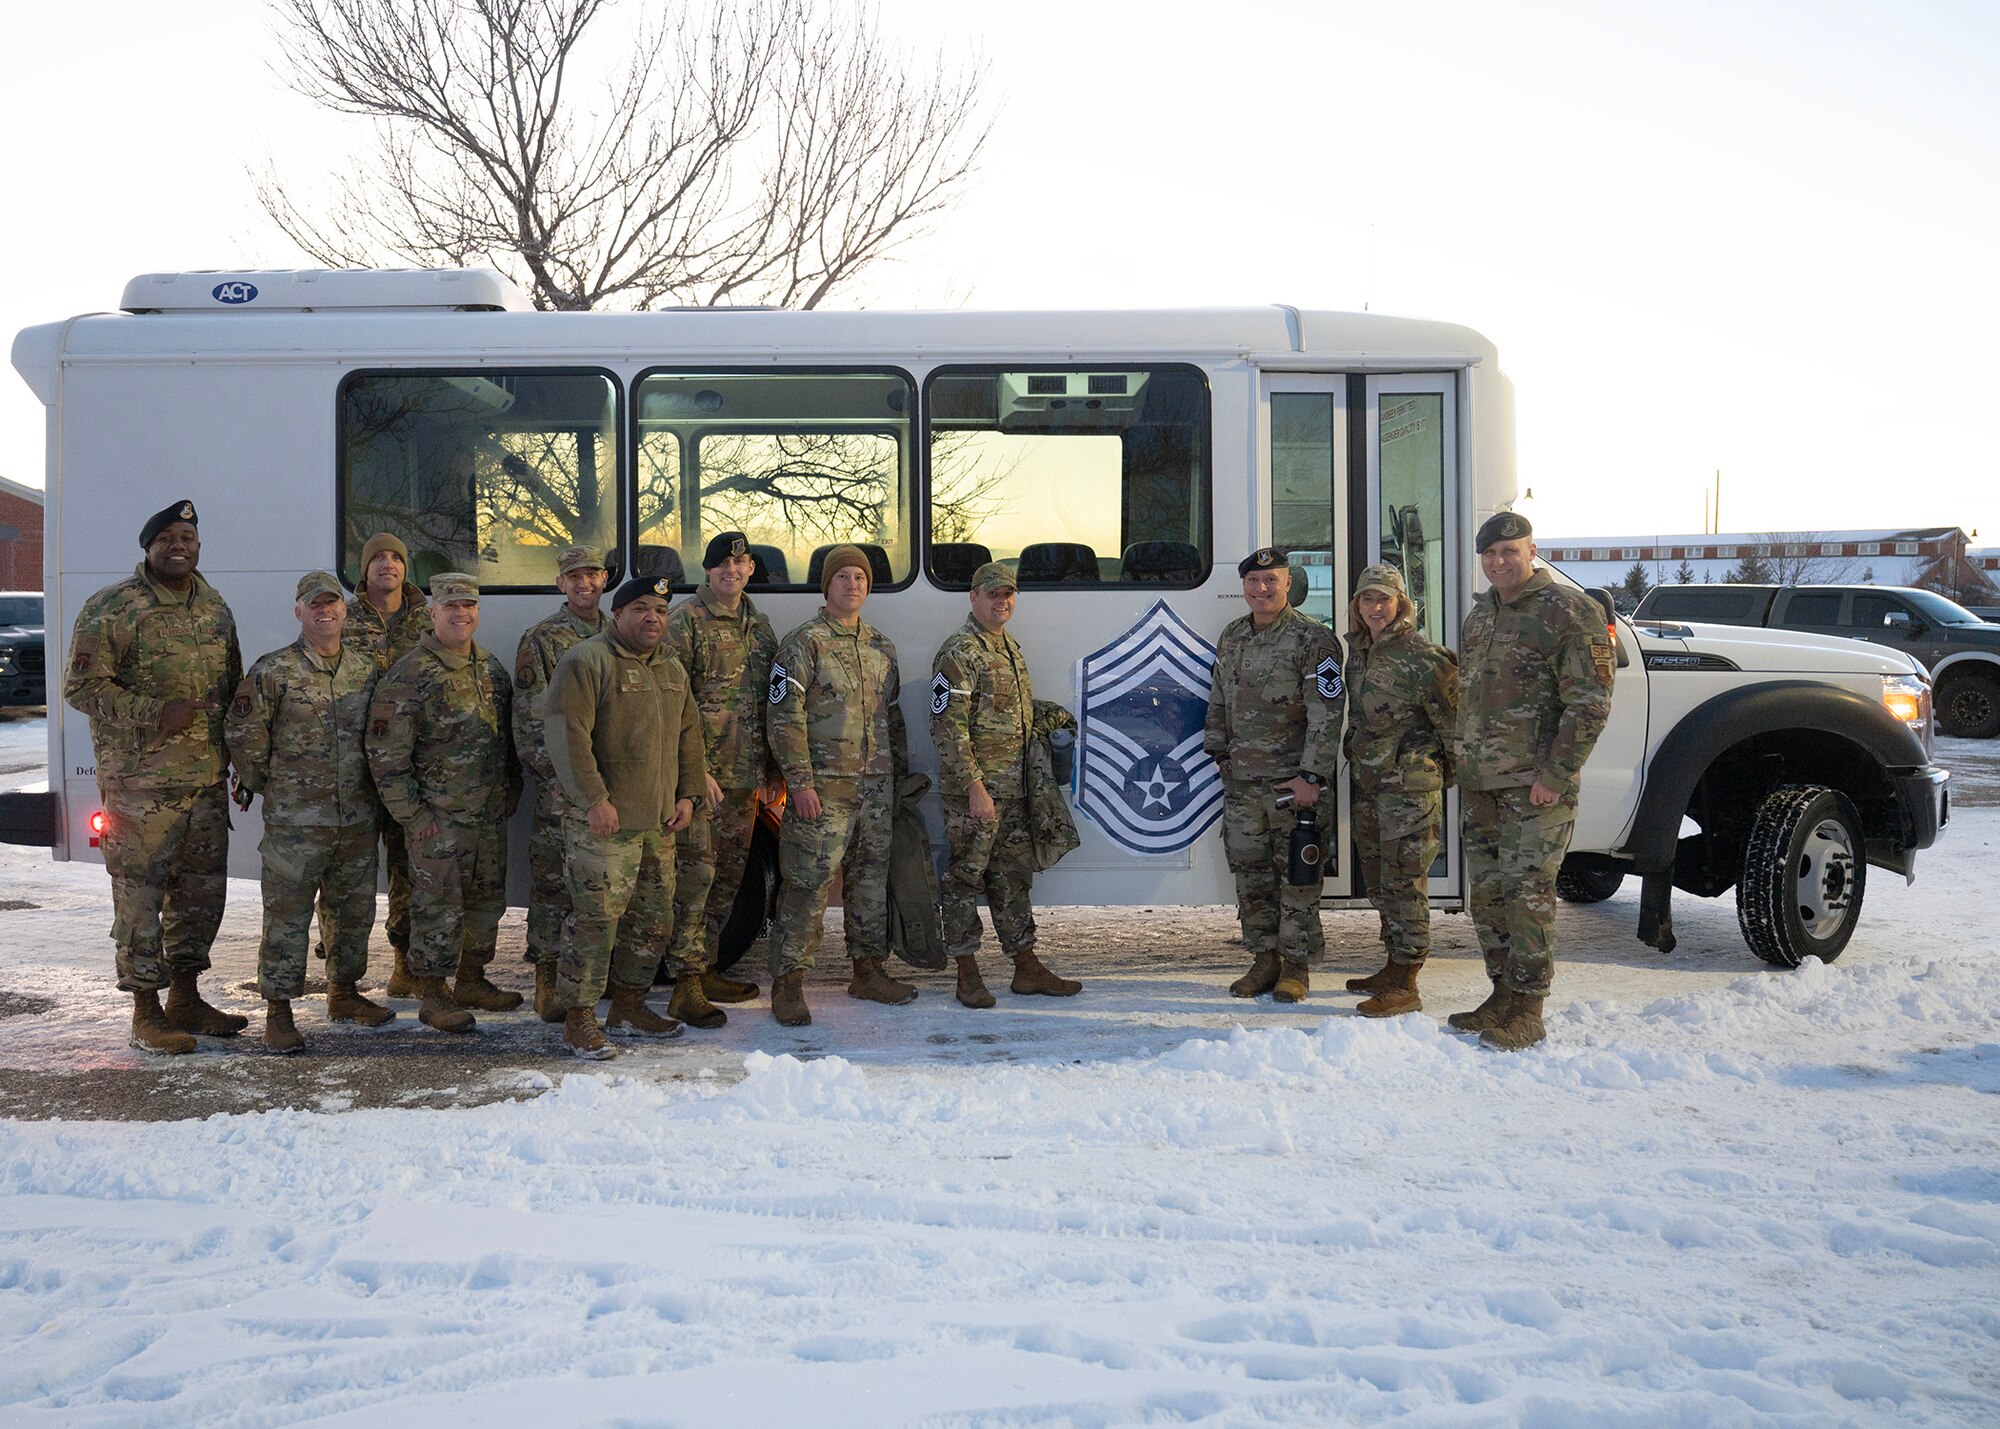 12 members of the Mighty Ninety standing in the snow in front of a bus adorned with a Chief Master Sergeant rank badge